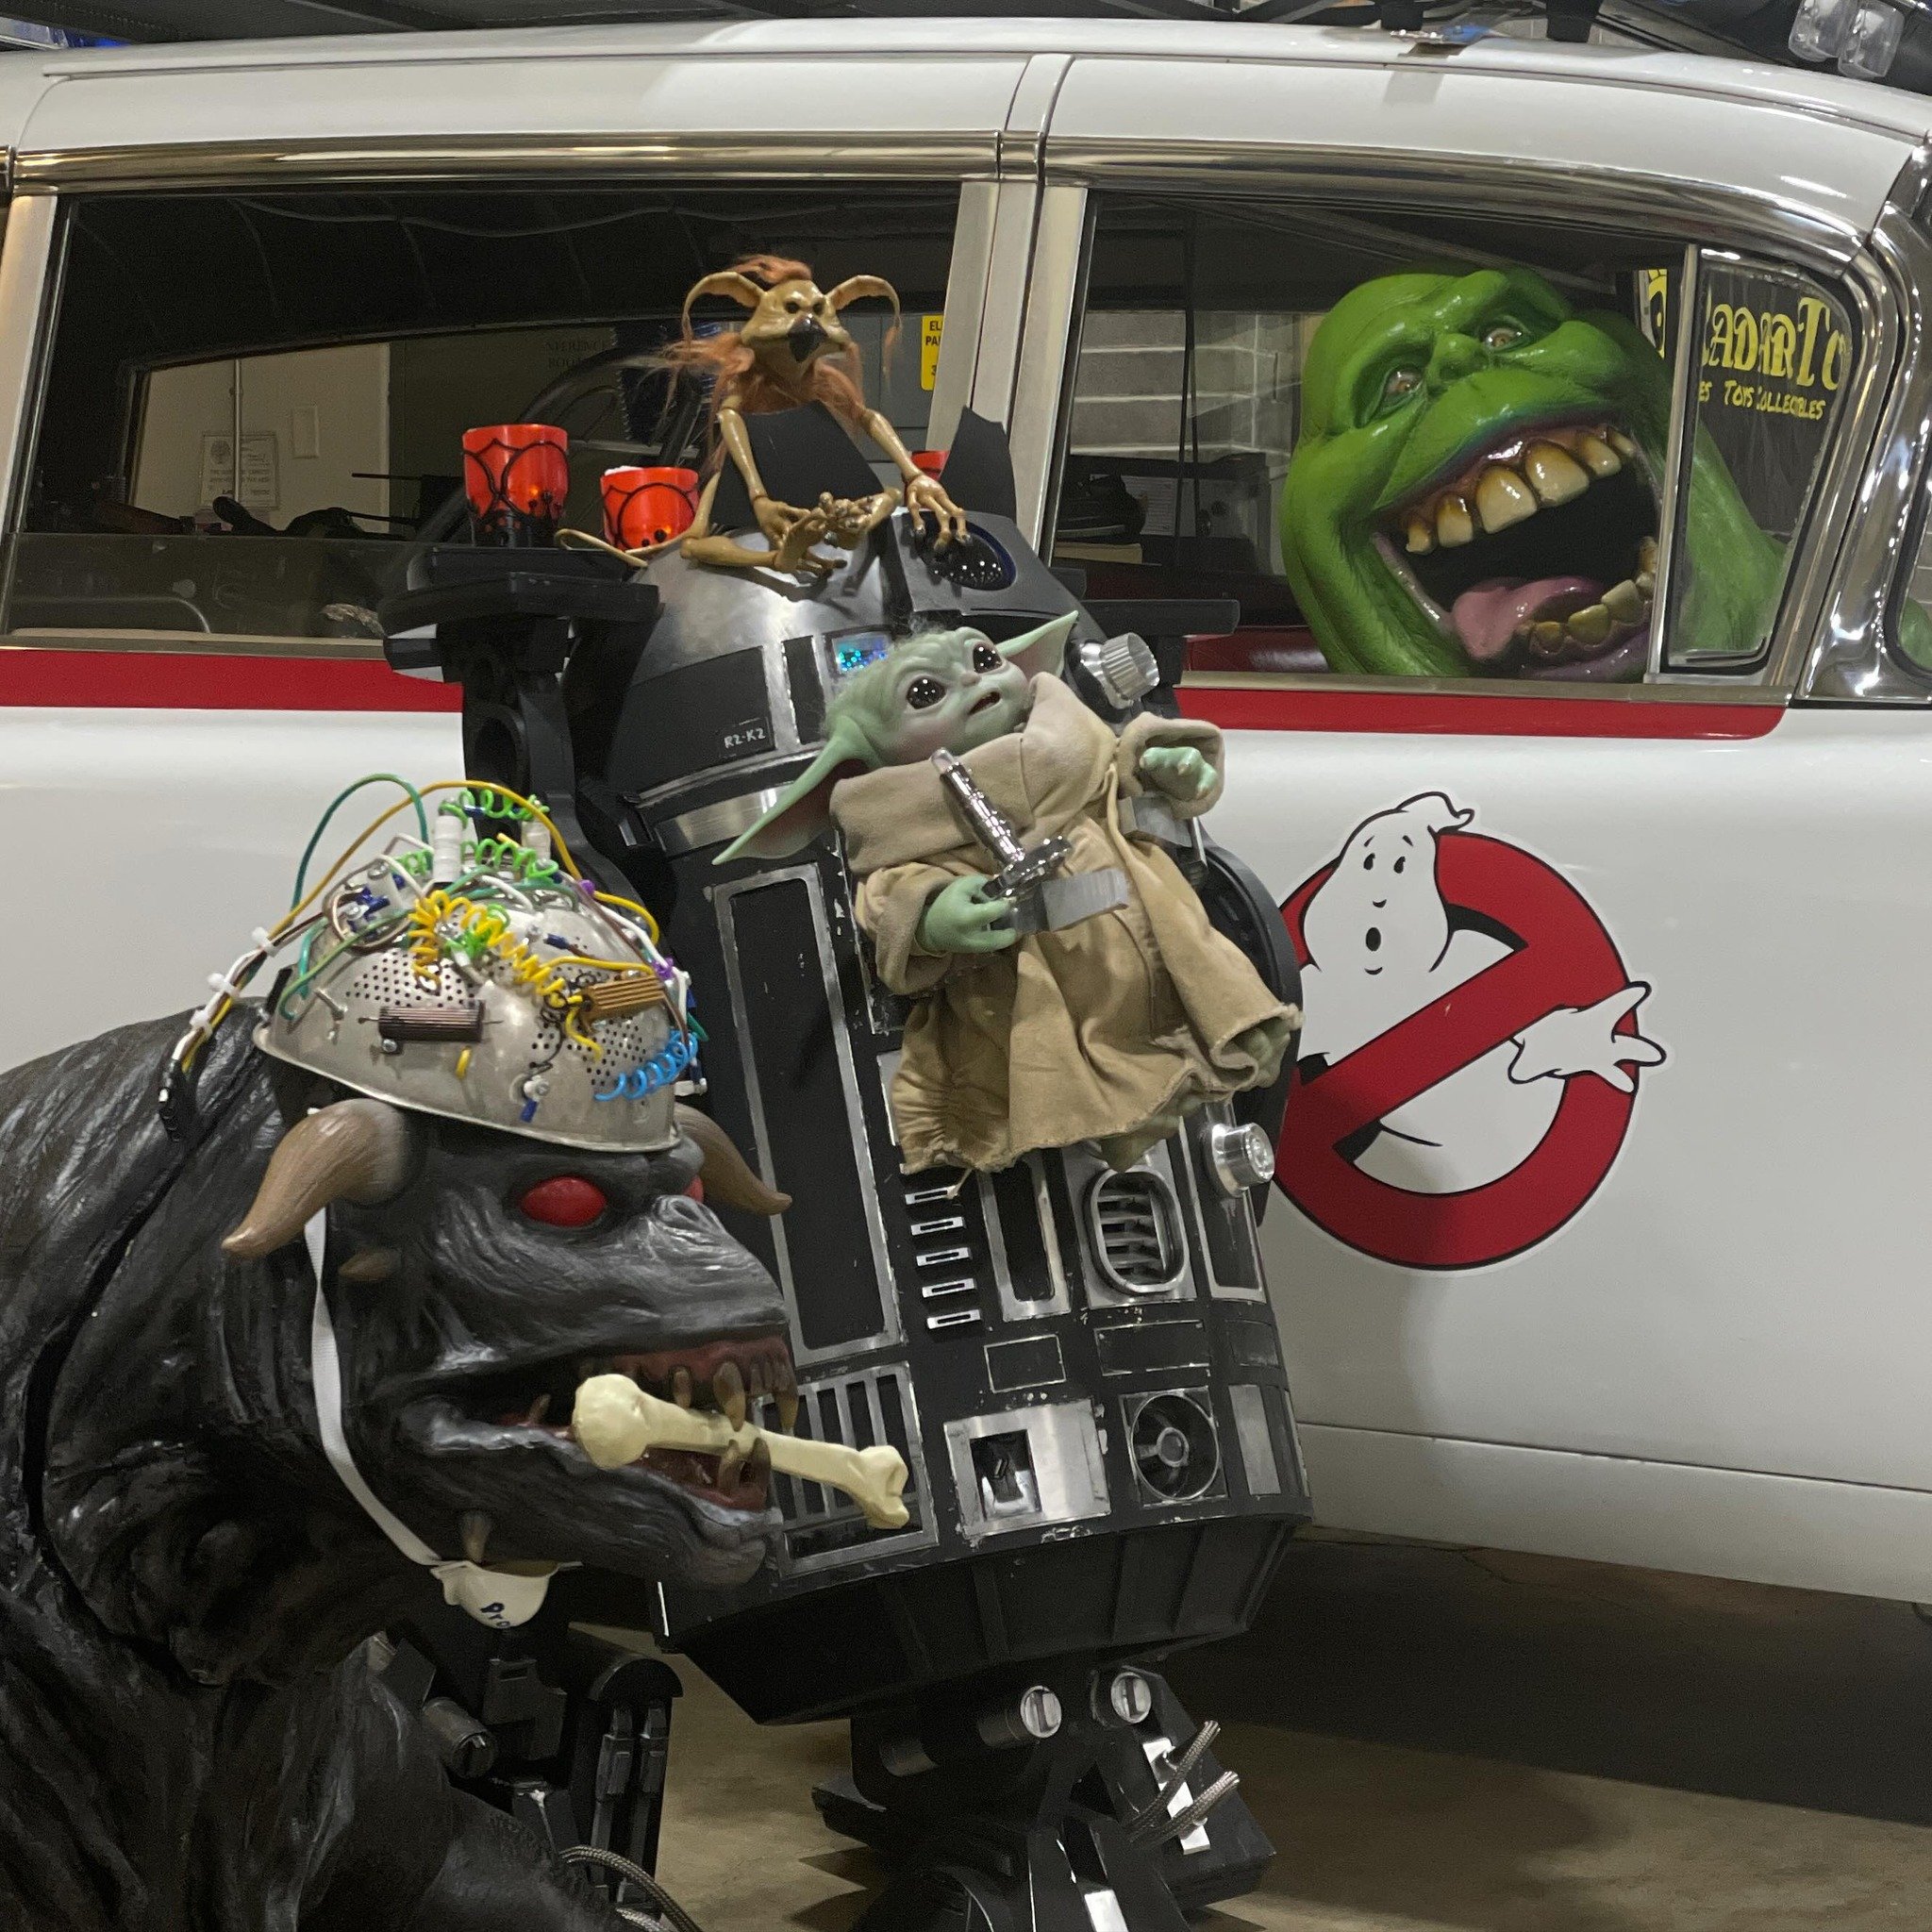 Thinking about doing a crossover R2 Ghostbuster mashup. #starwars #ghostbusters